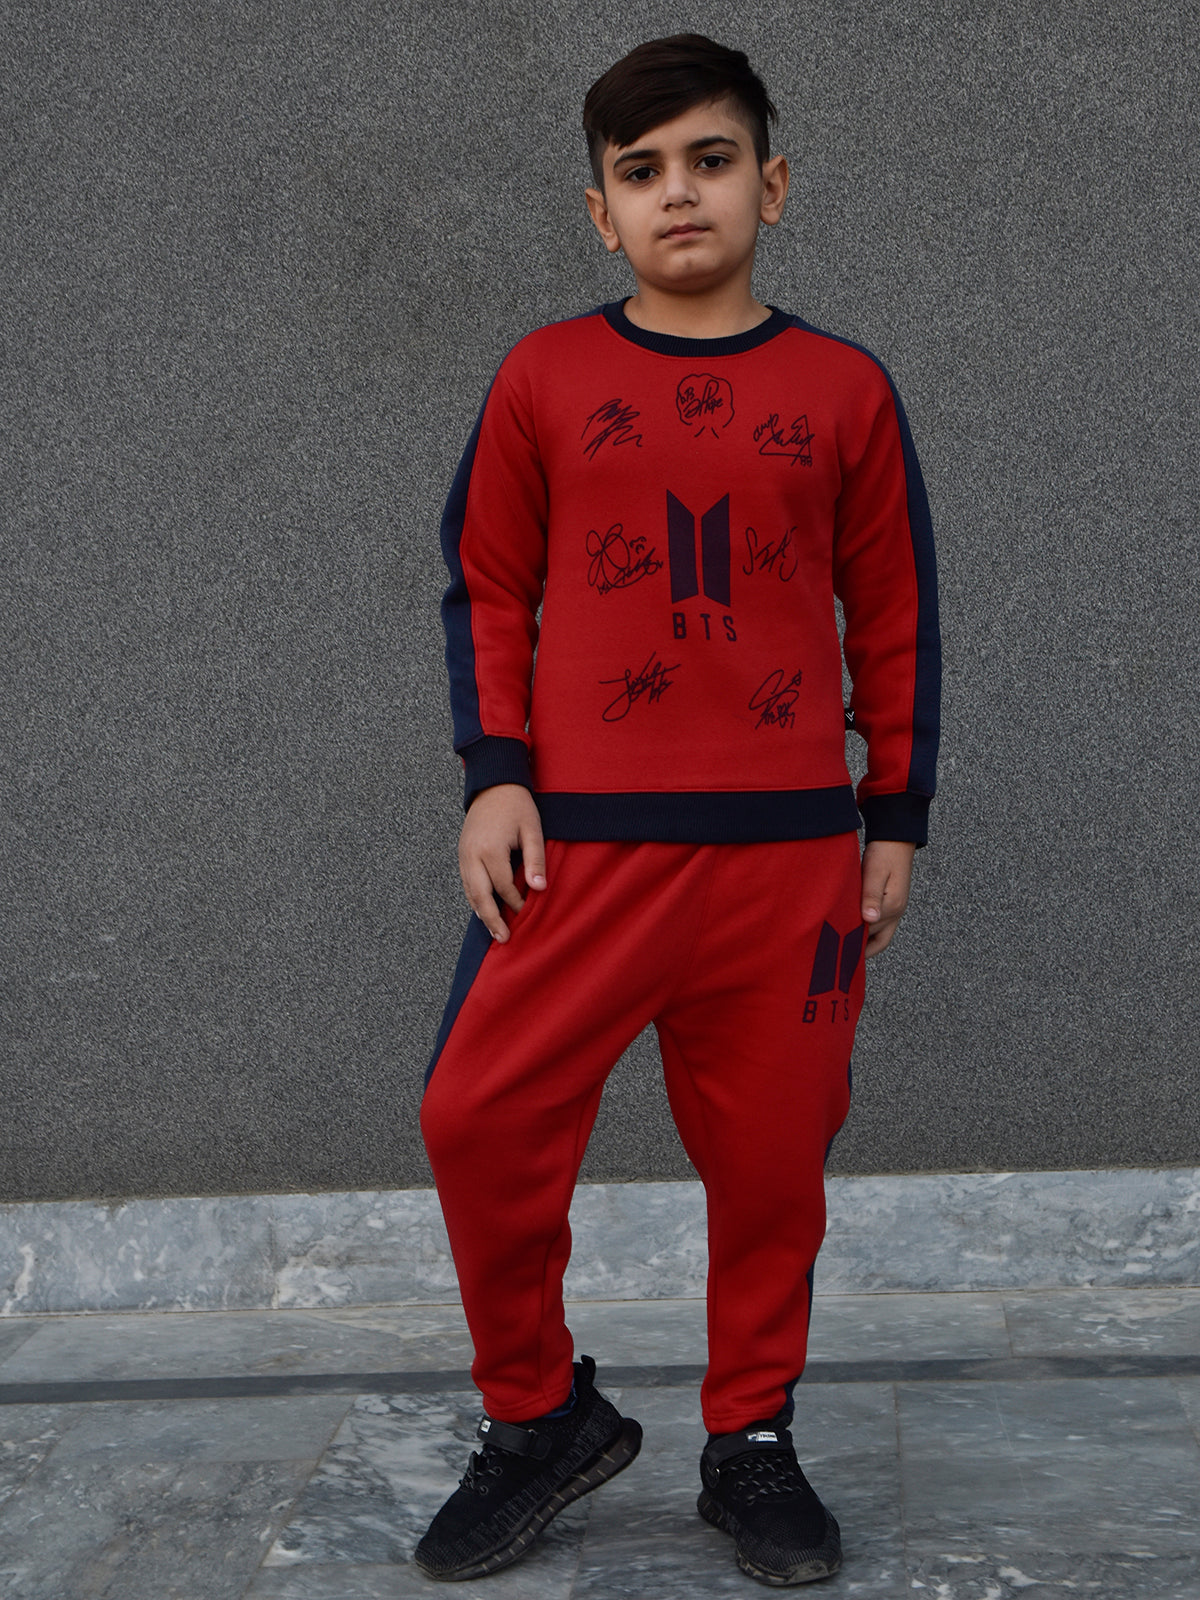 BTS Fleece Tracksuit For Kids-Red with Navy Panels-BE55/BR880